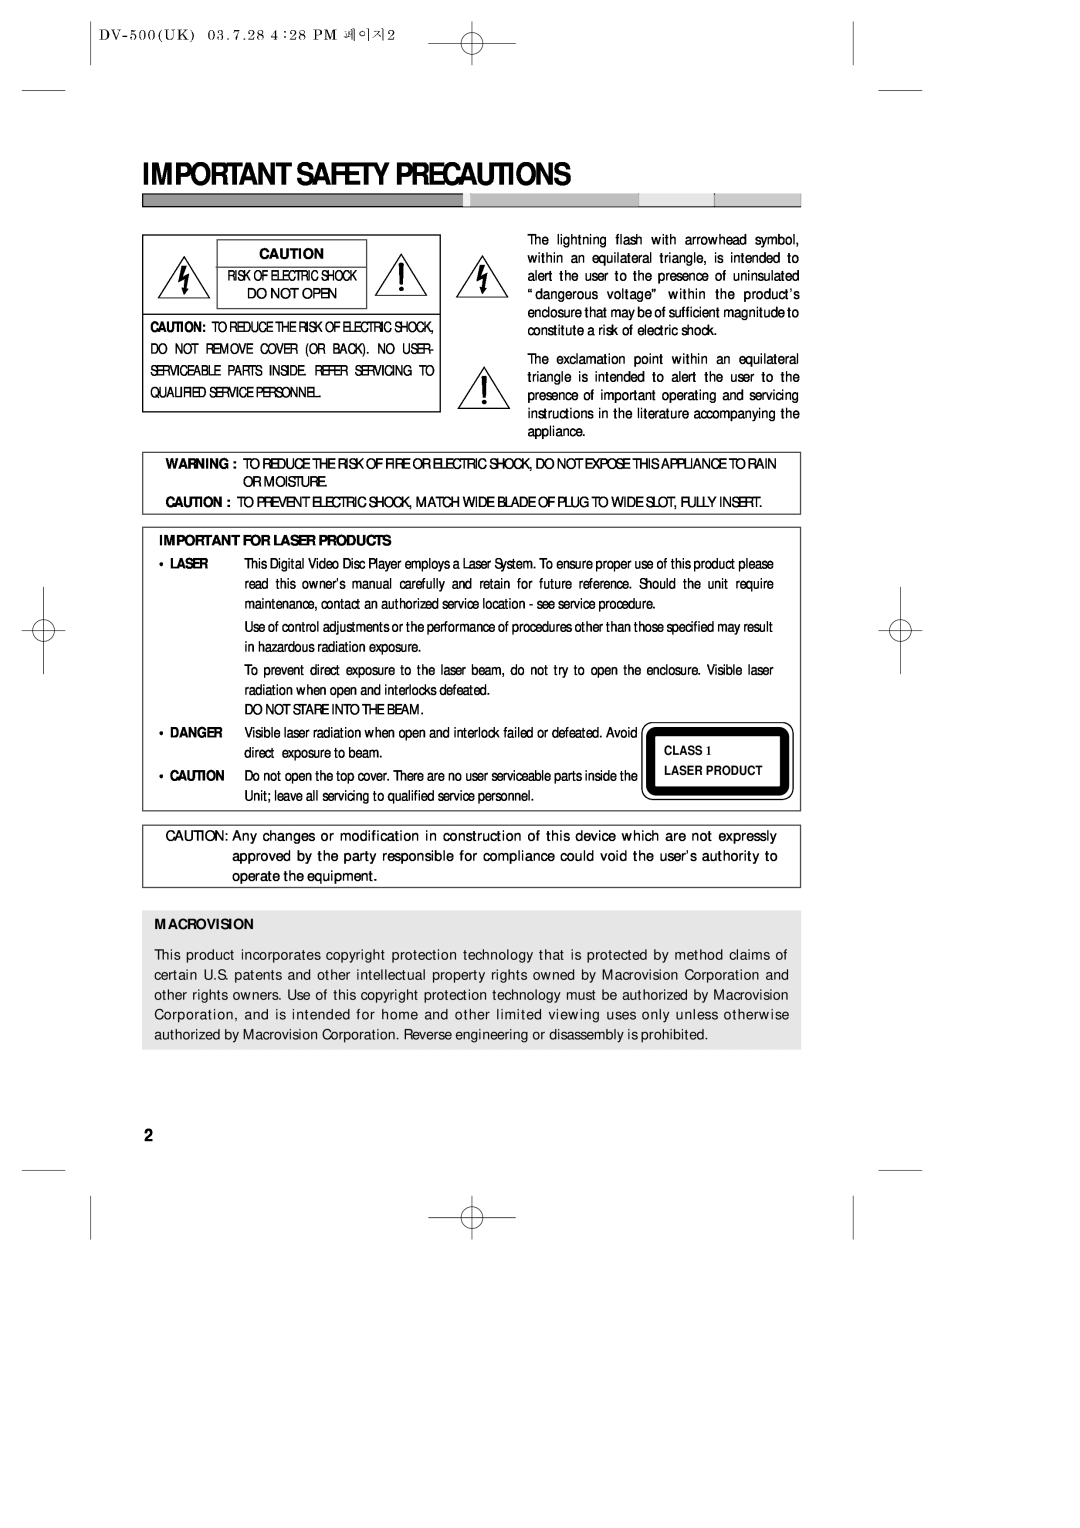 Daewoo DV-500 owner manual Important Safety Precautions, Important For Laser Products, Macrovision 